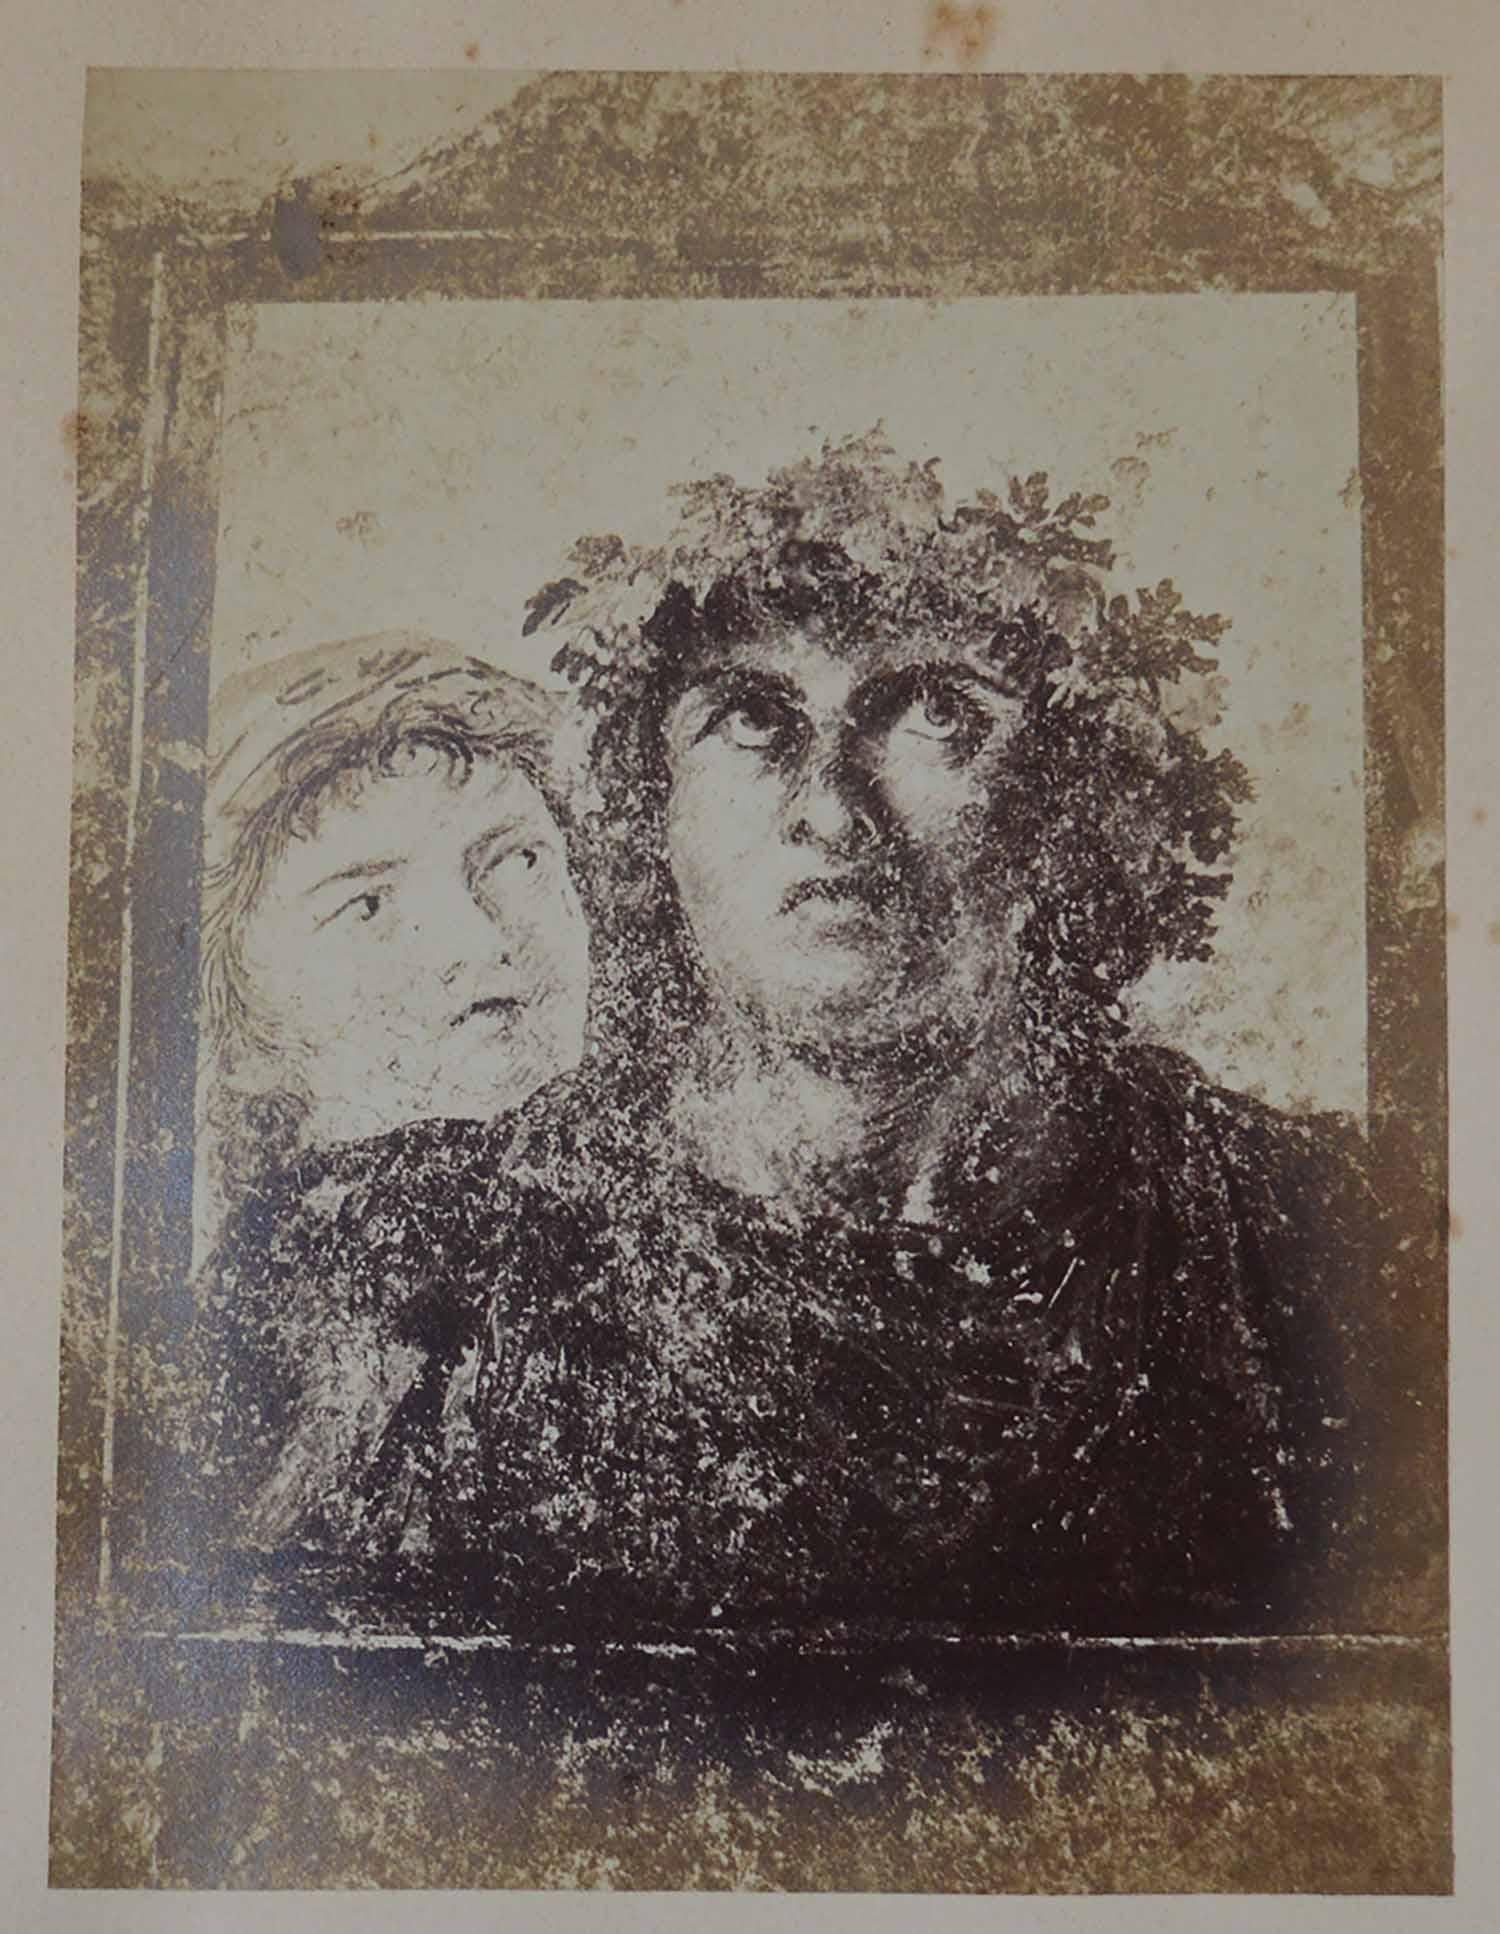 A real photograph from Thomas H. Dyer's Ruins of Pompeii collection, 1867.

Albumen print, tipped in. Mounted on card.

The actual photograph measures: 6.5 x 5 inches (17 x 12 cm).

Free shipping.
 